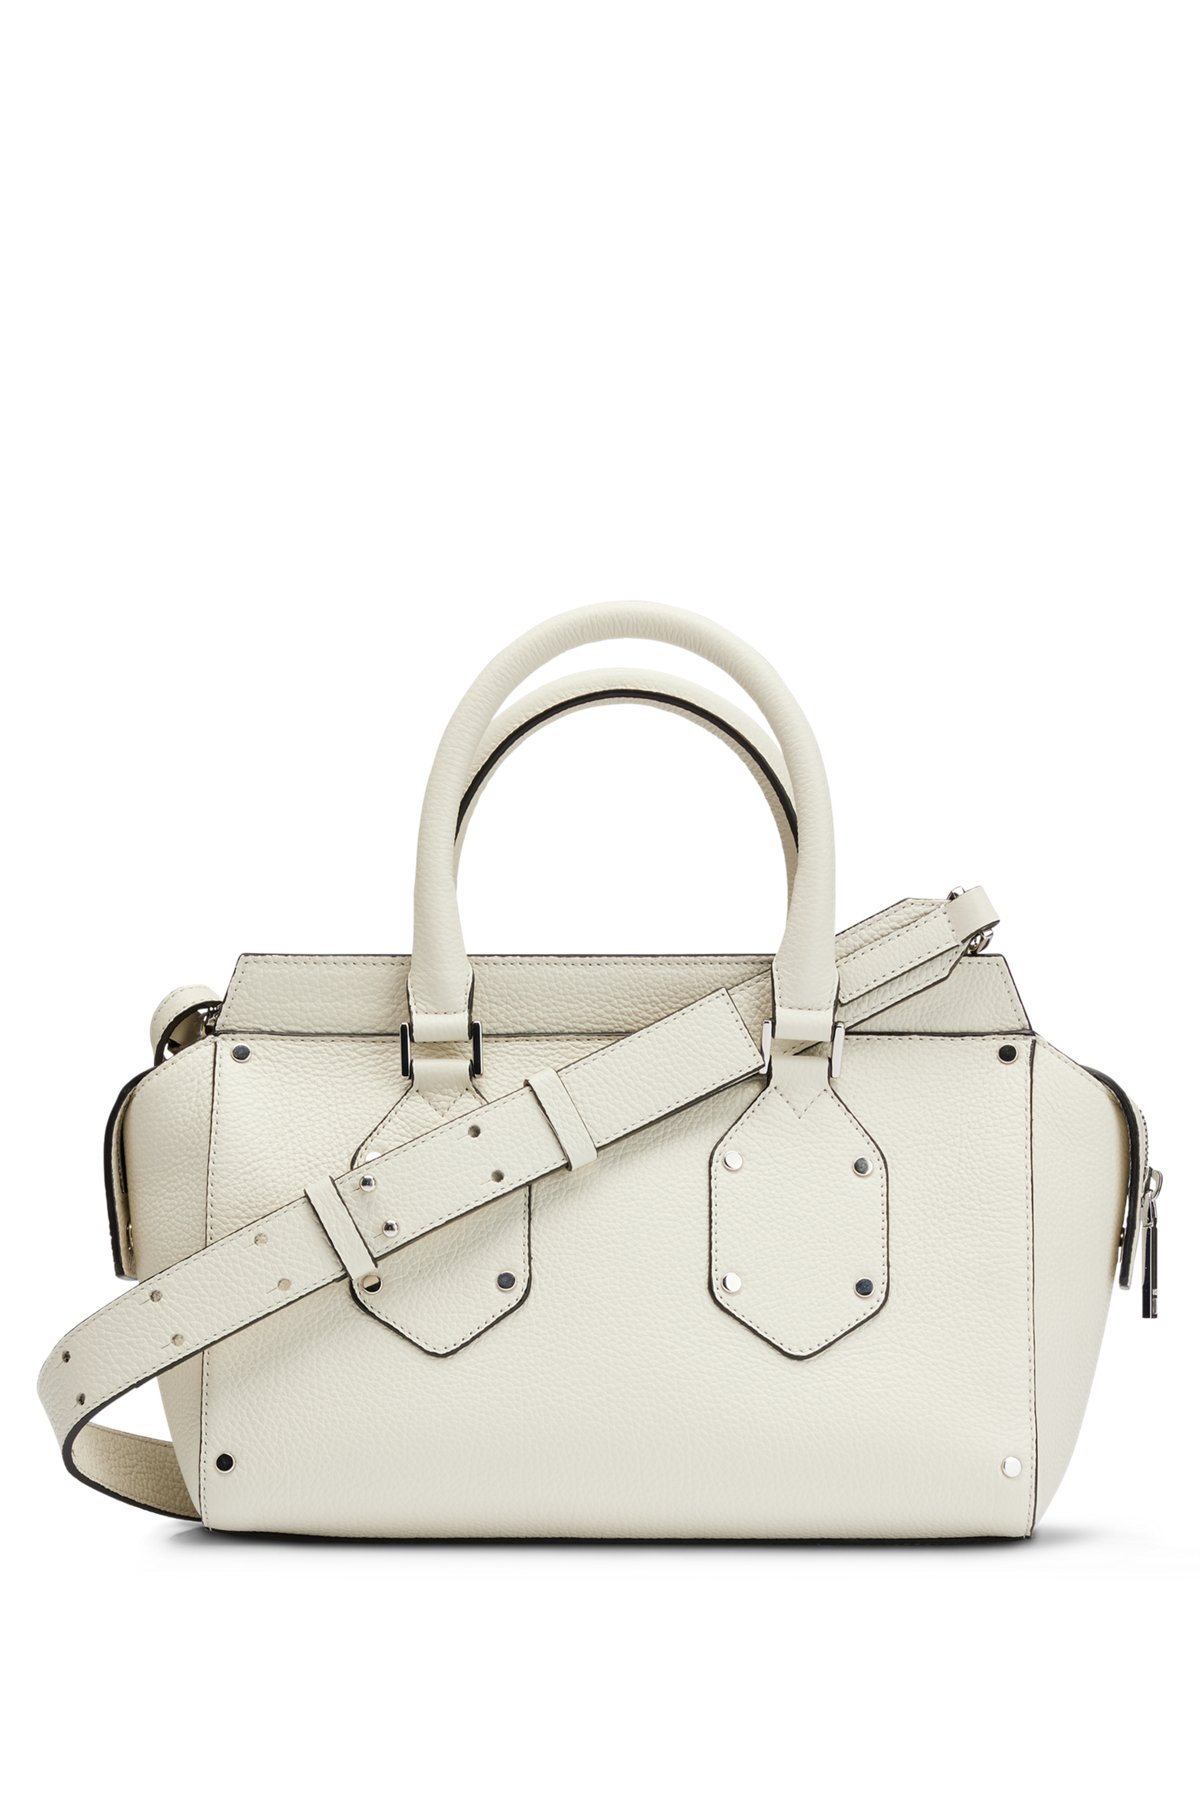 Grained-leather tote bag with branded padlock and tag, White